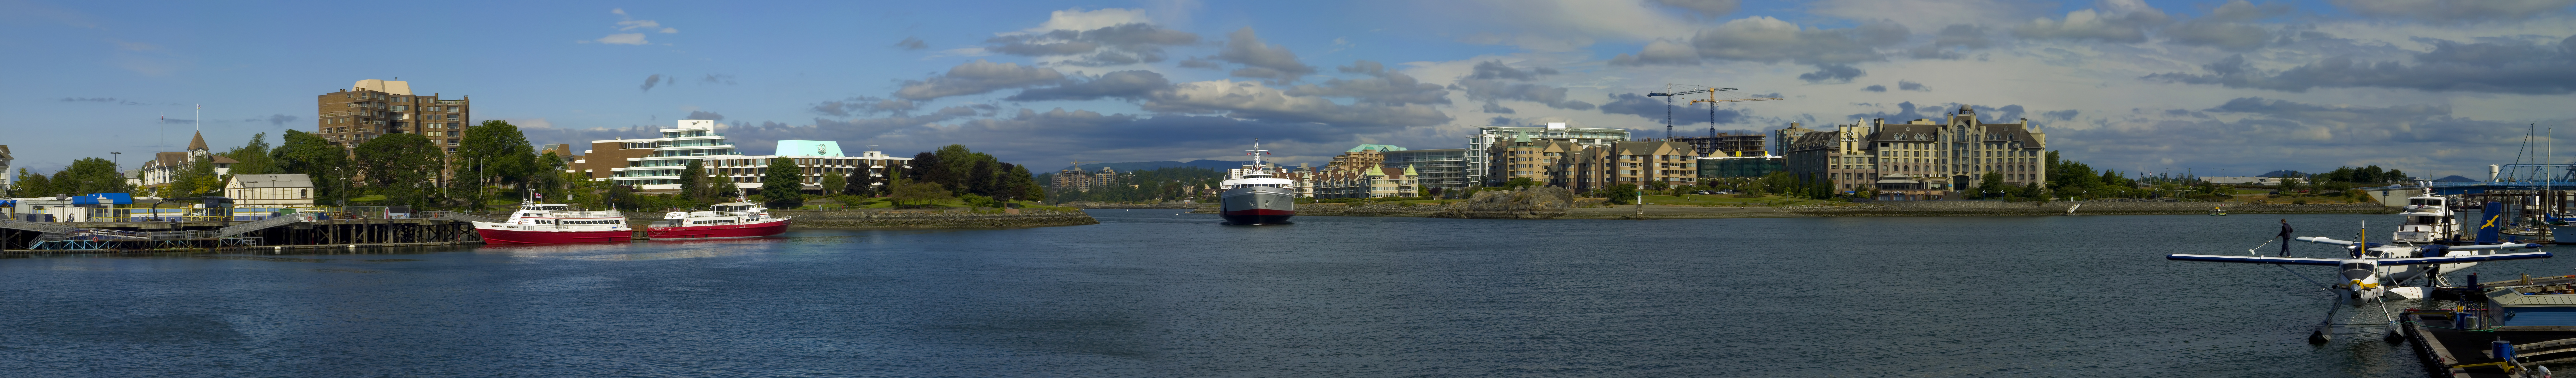 Victoria's inner harbor with the M/V Coho coming into port.